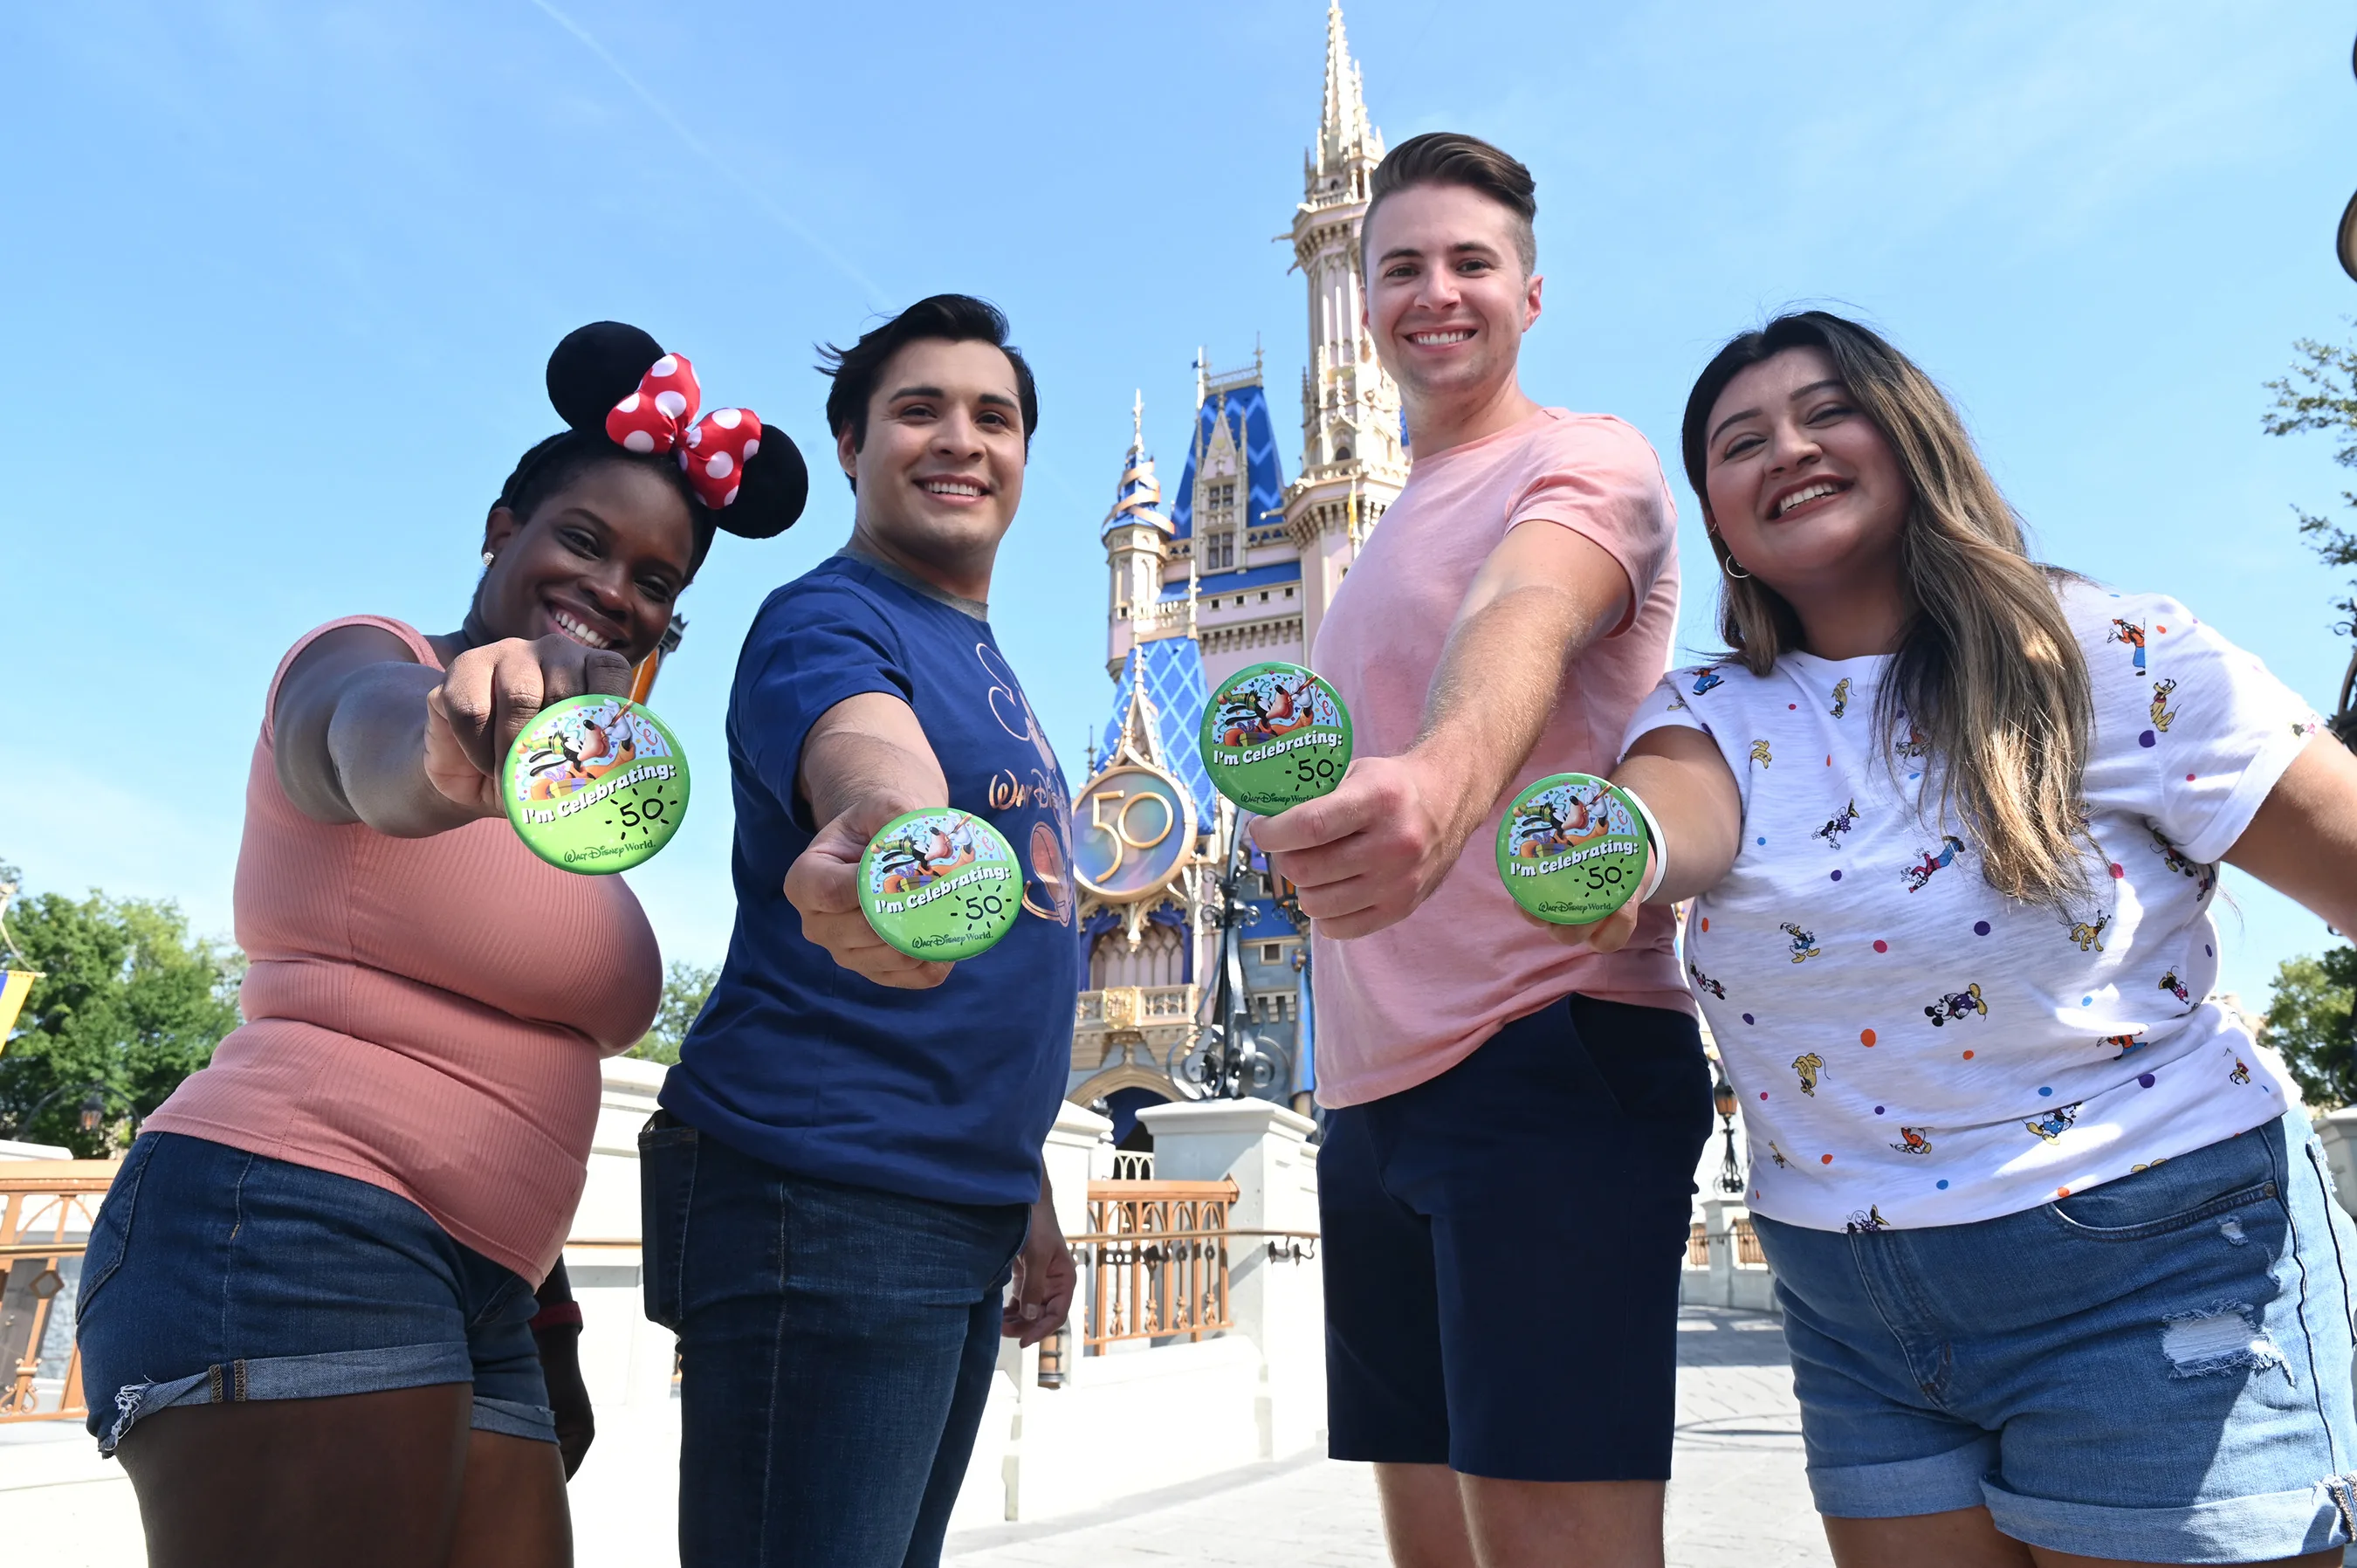 Friend with celebration buttons at Disney World